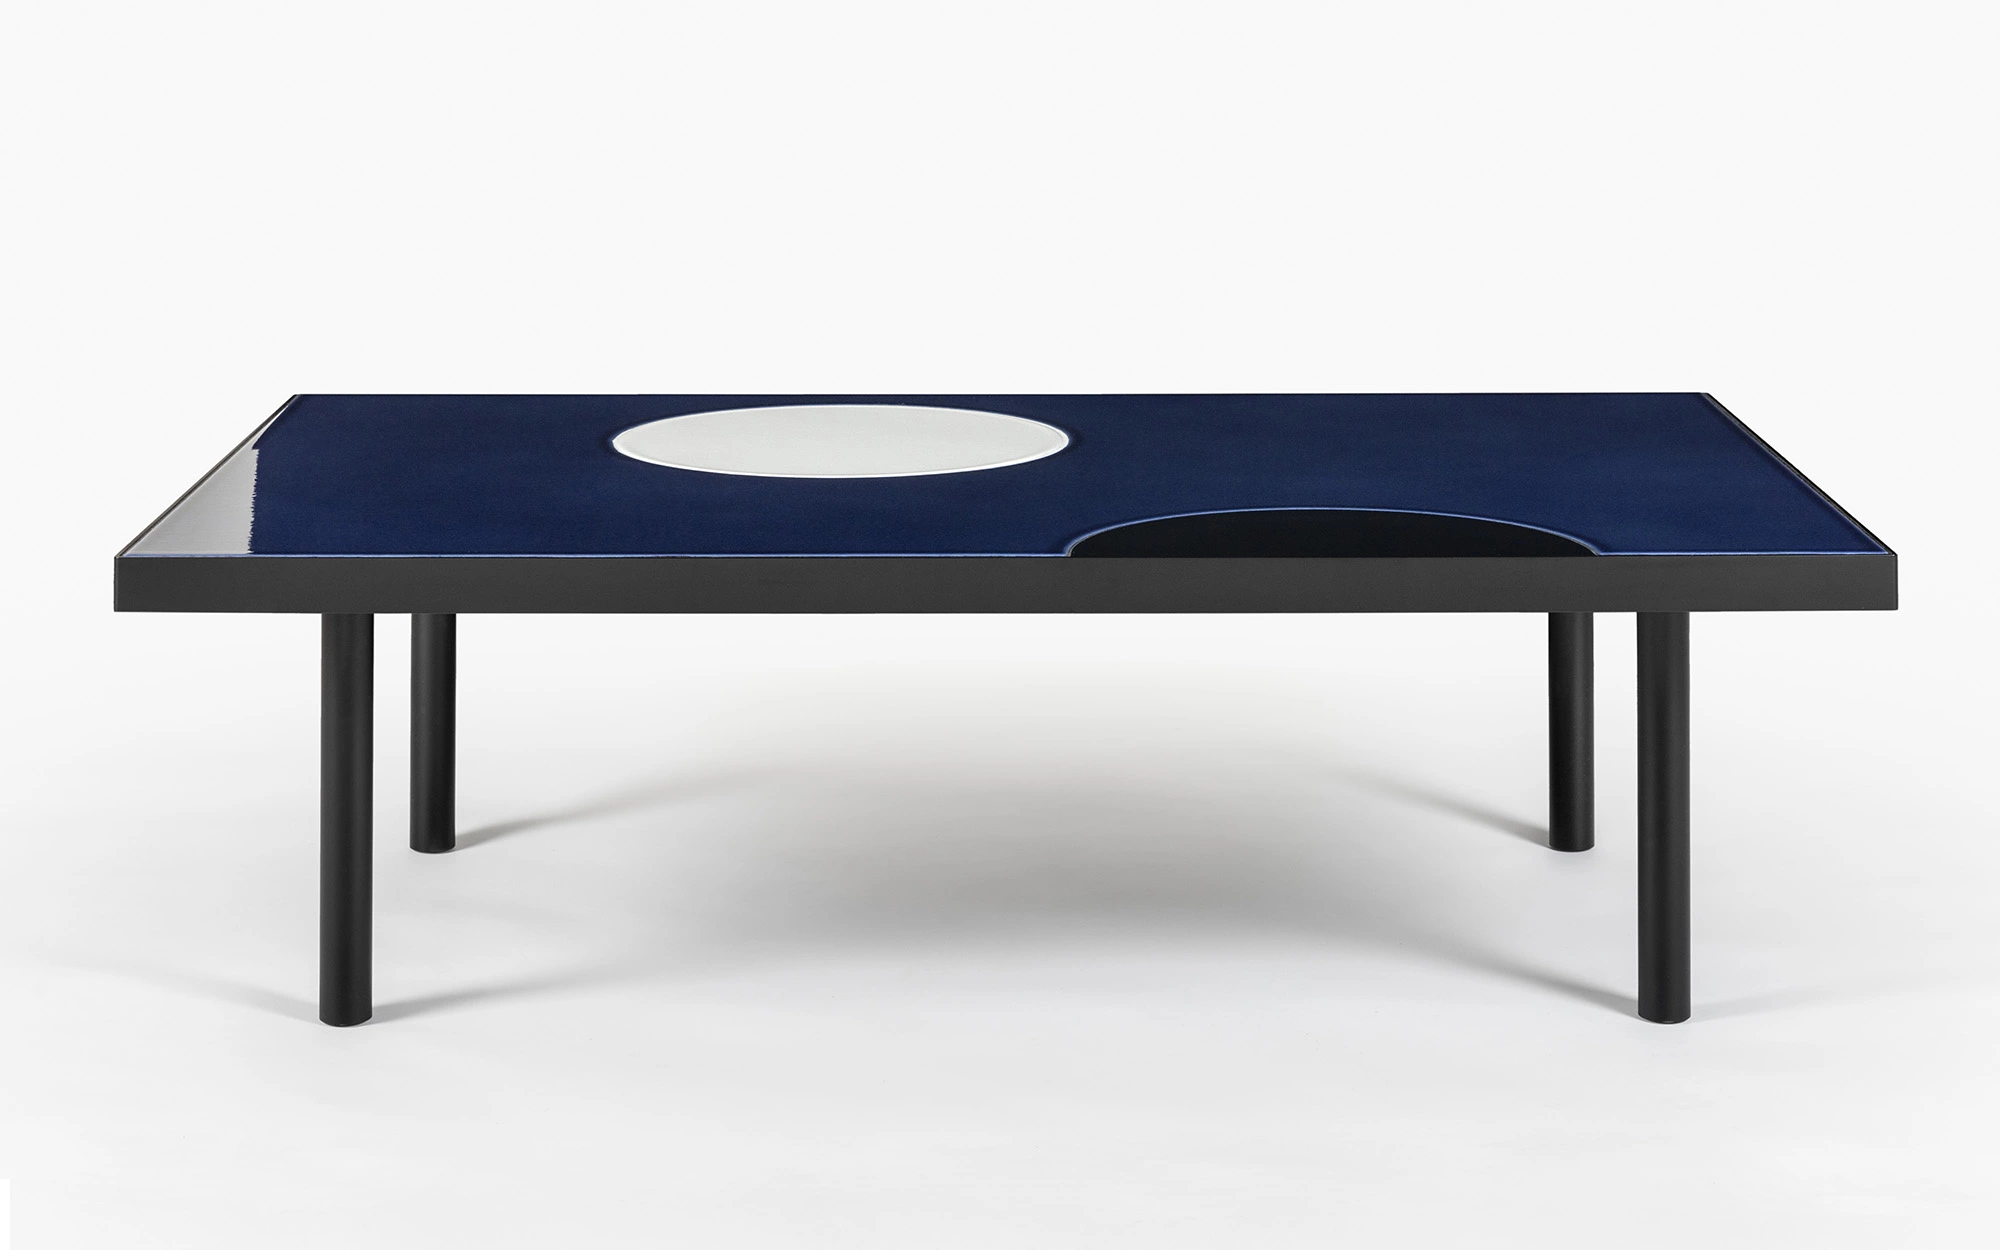 Translation Discolo Coffee Table - Pierre Charpin - Miscellaneous - Galerie kreo